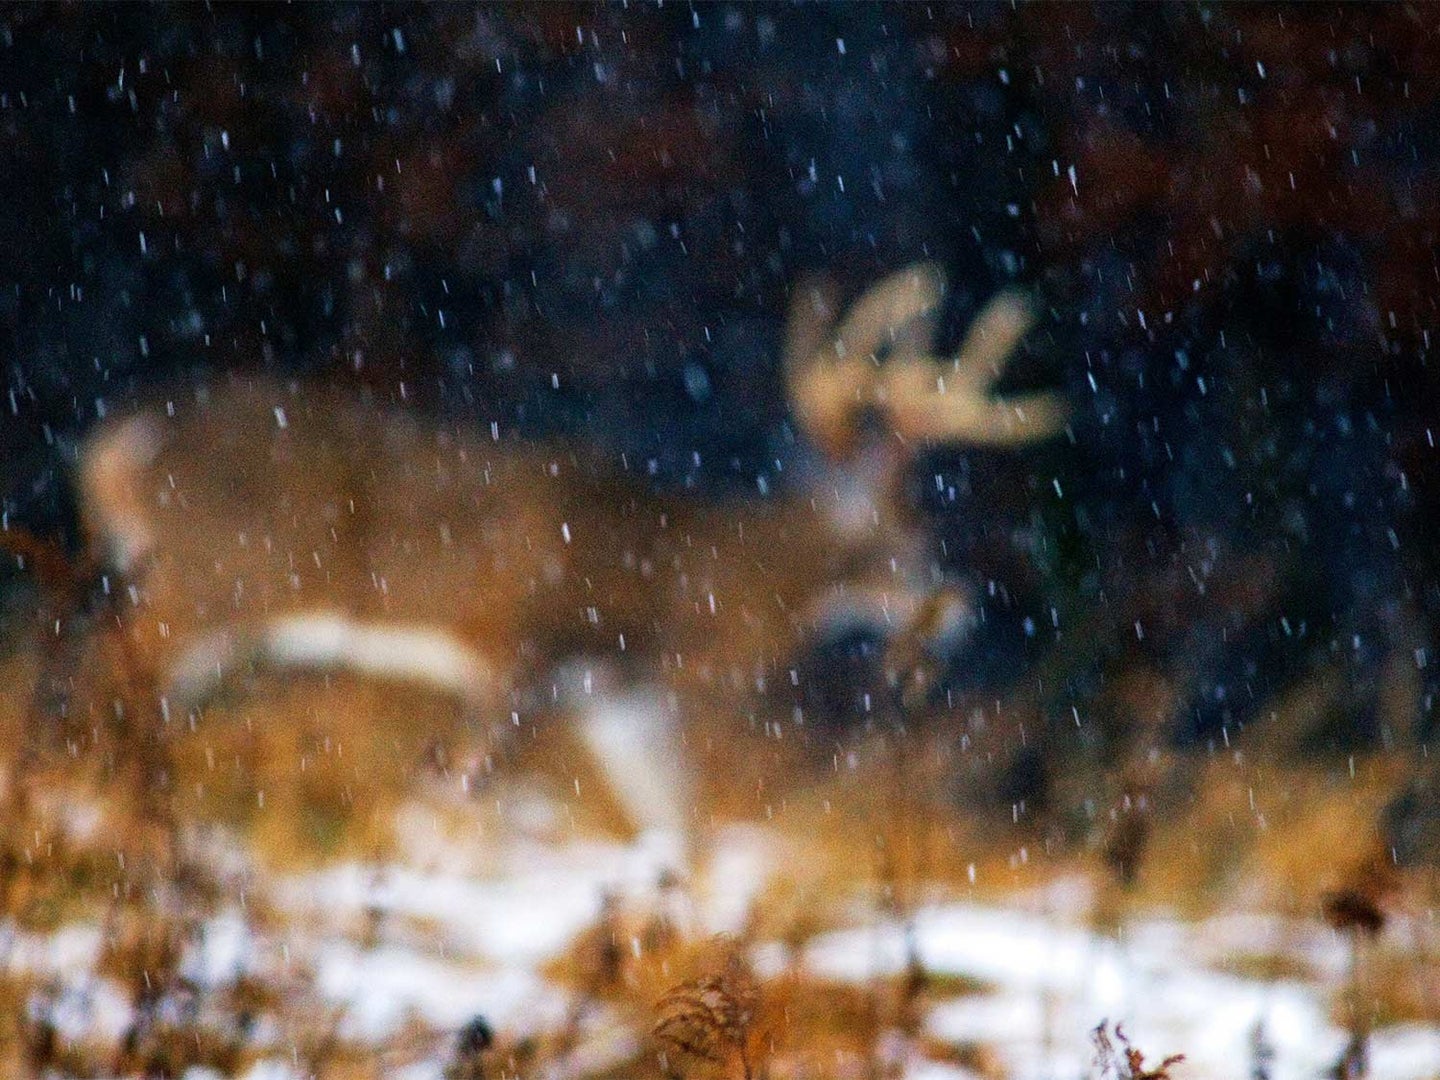 A whitetail deer in the snow.